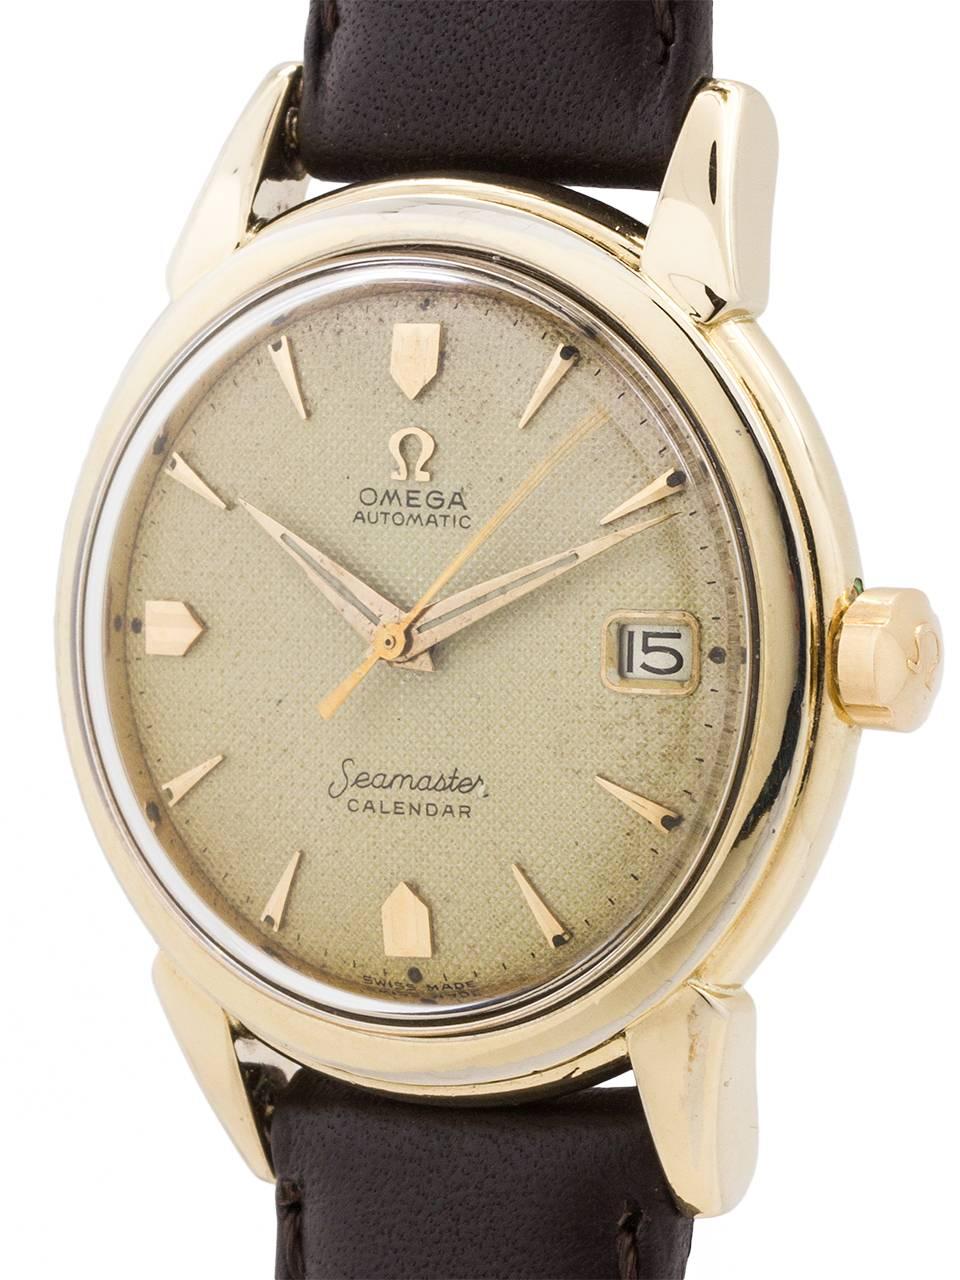 
Vintage Omega Seamaster Calendar automatic ref 6275 circa 1956. Featuring a 35 X 43mm diameter 14K gold filled case with wide, stepped bezel and gold filled case back. With original, aged, honeycomb champagne dial with eccentric design applied gold